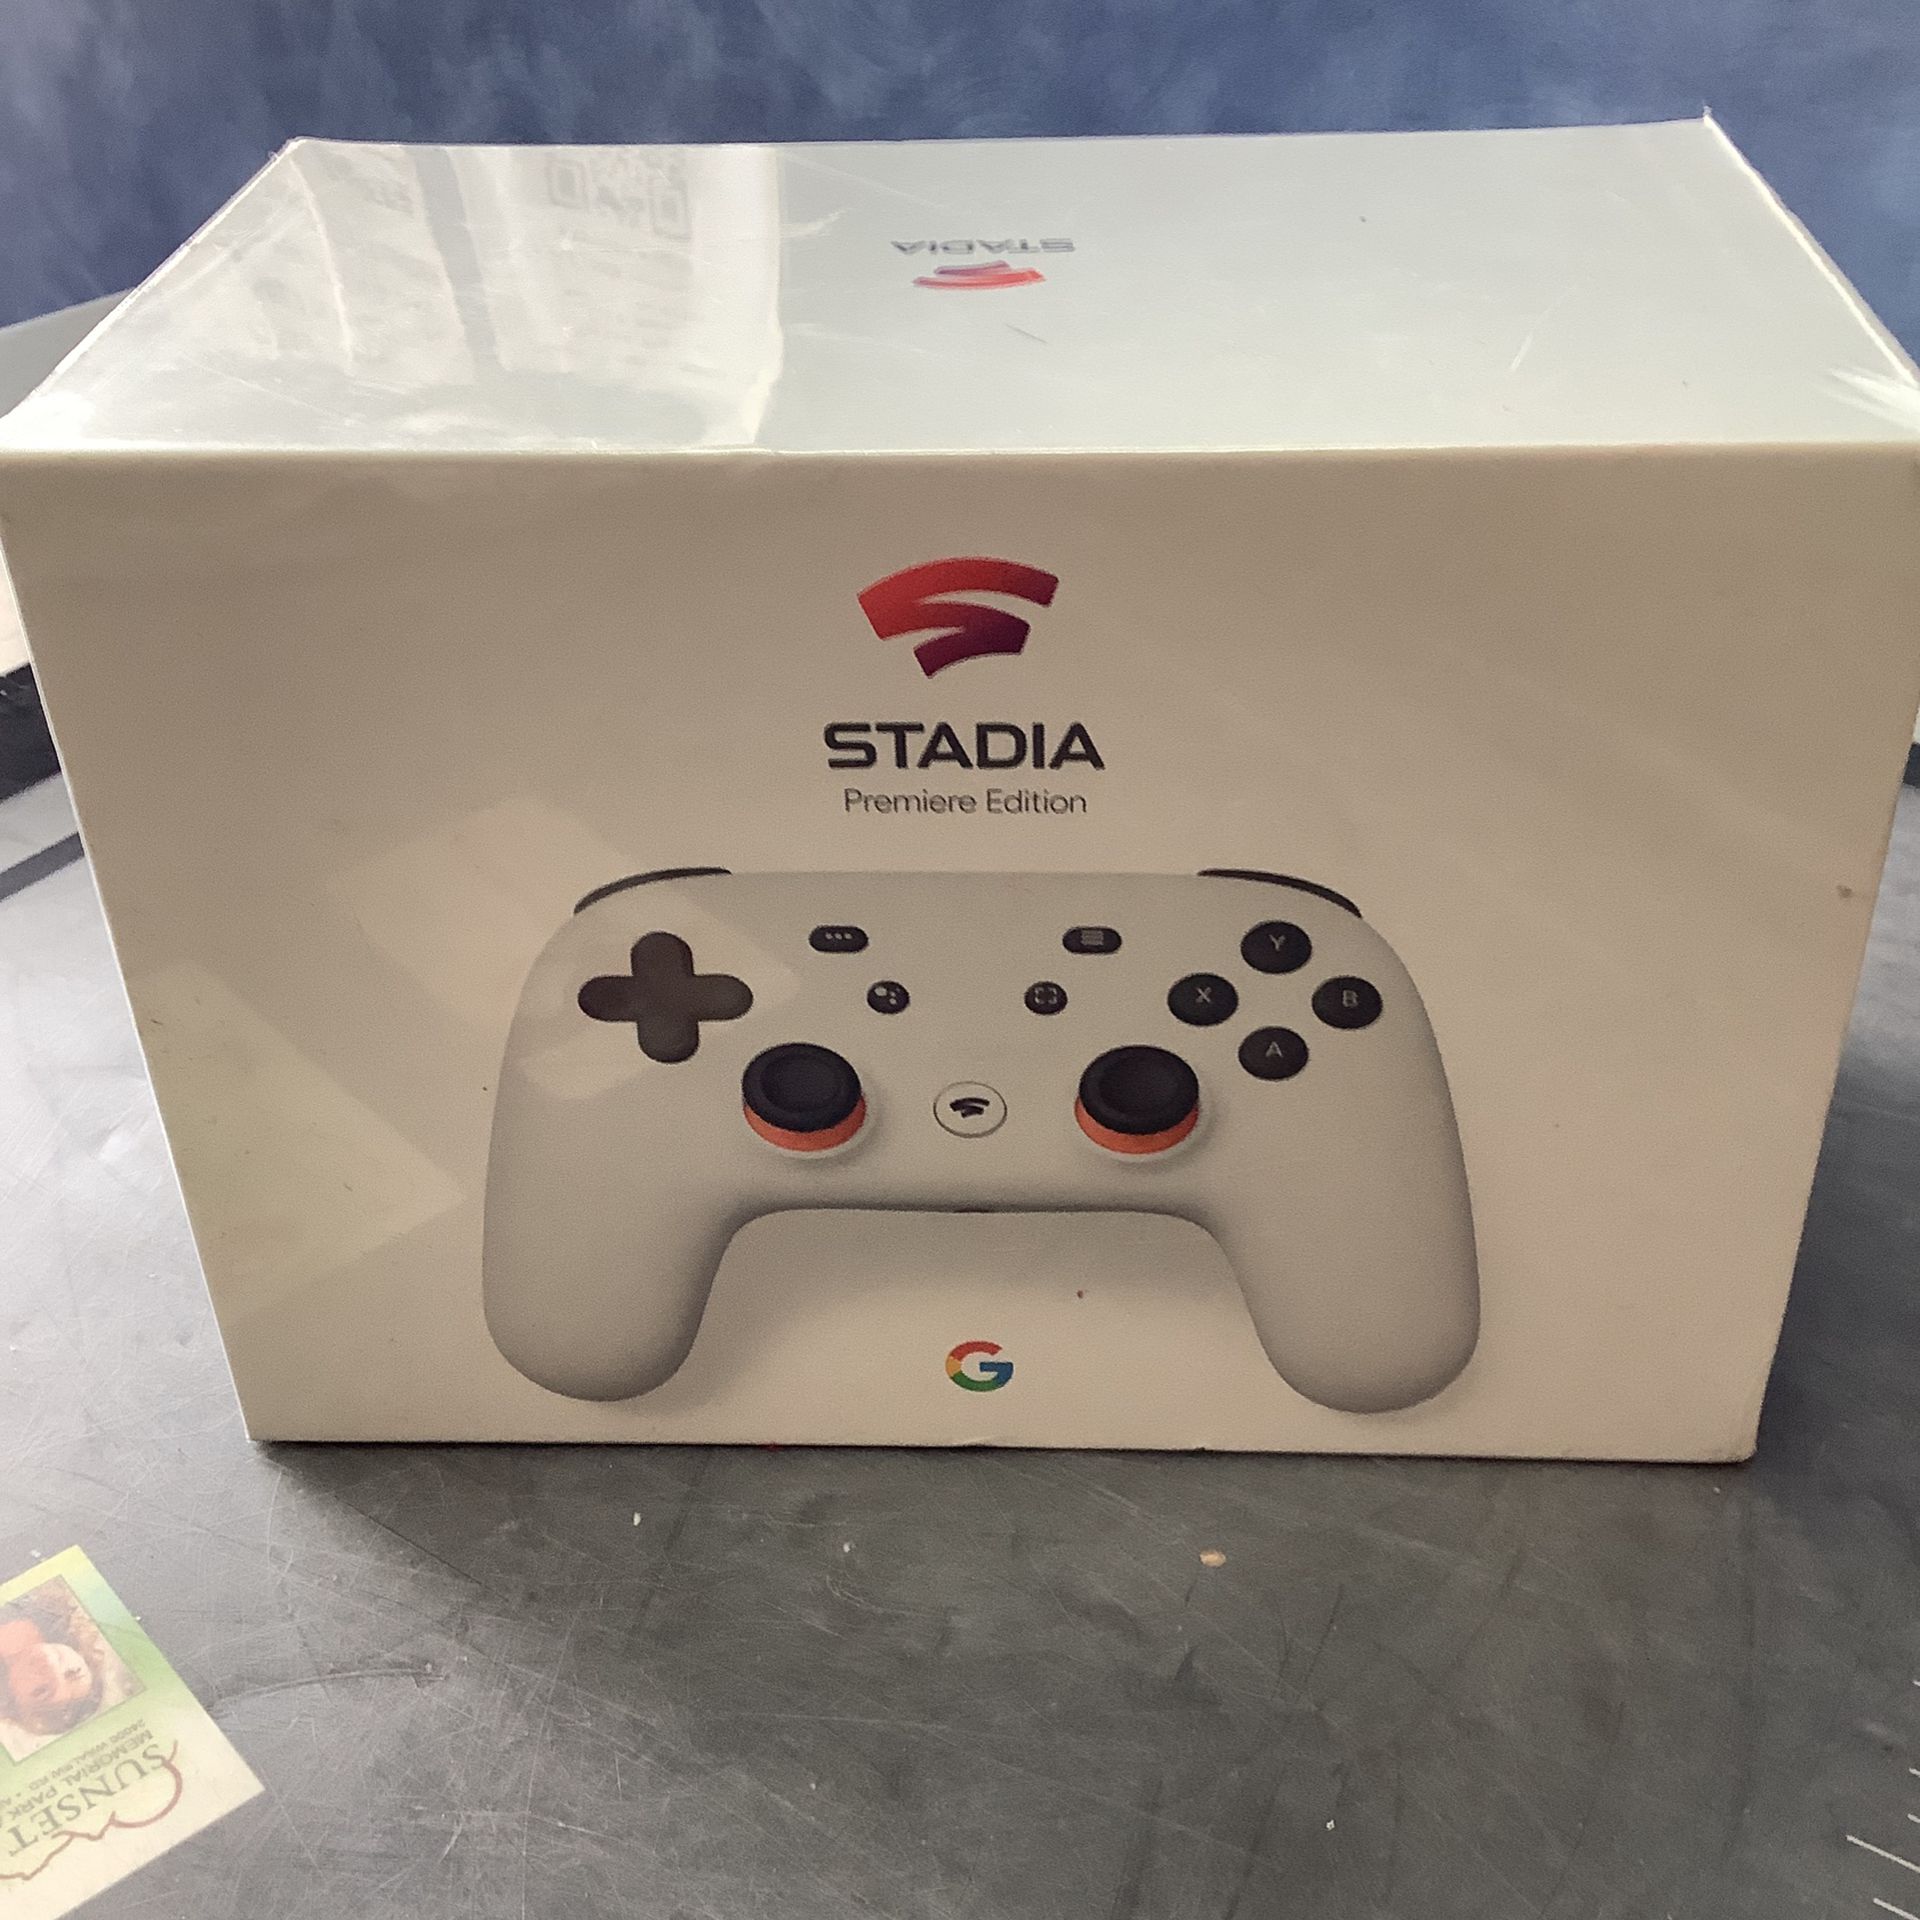 STADIA: PREMIER EDITION GAMING CONTROLLER 